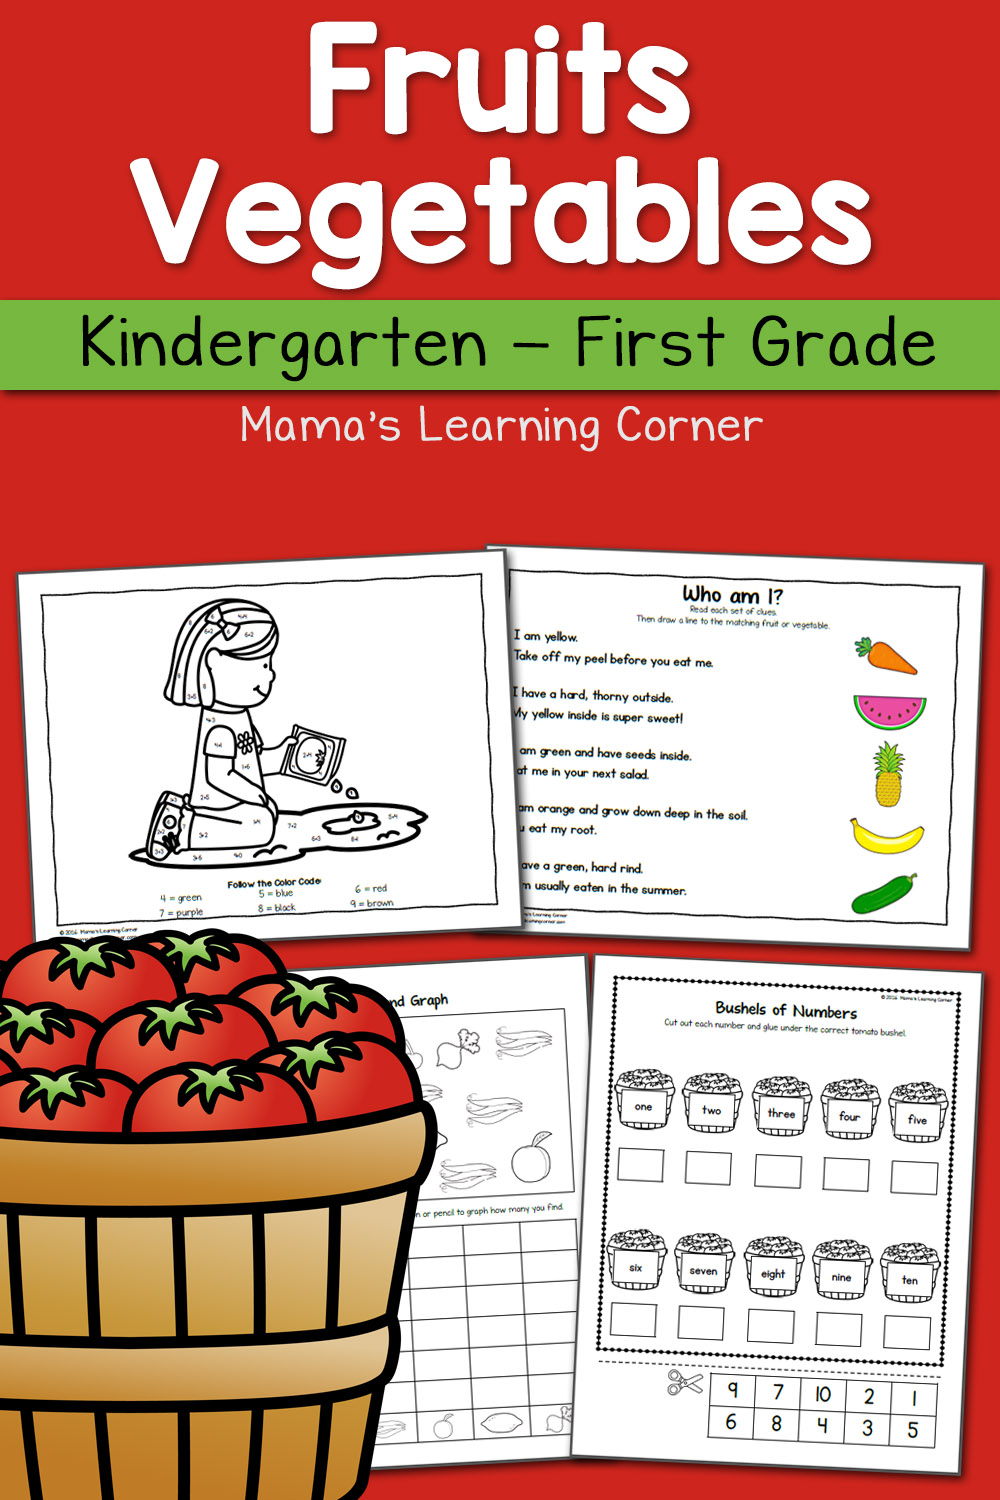 Fruit and Vegetable Worksheets for Kindergarten and First Grade - Mamas